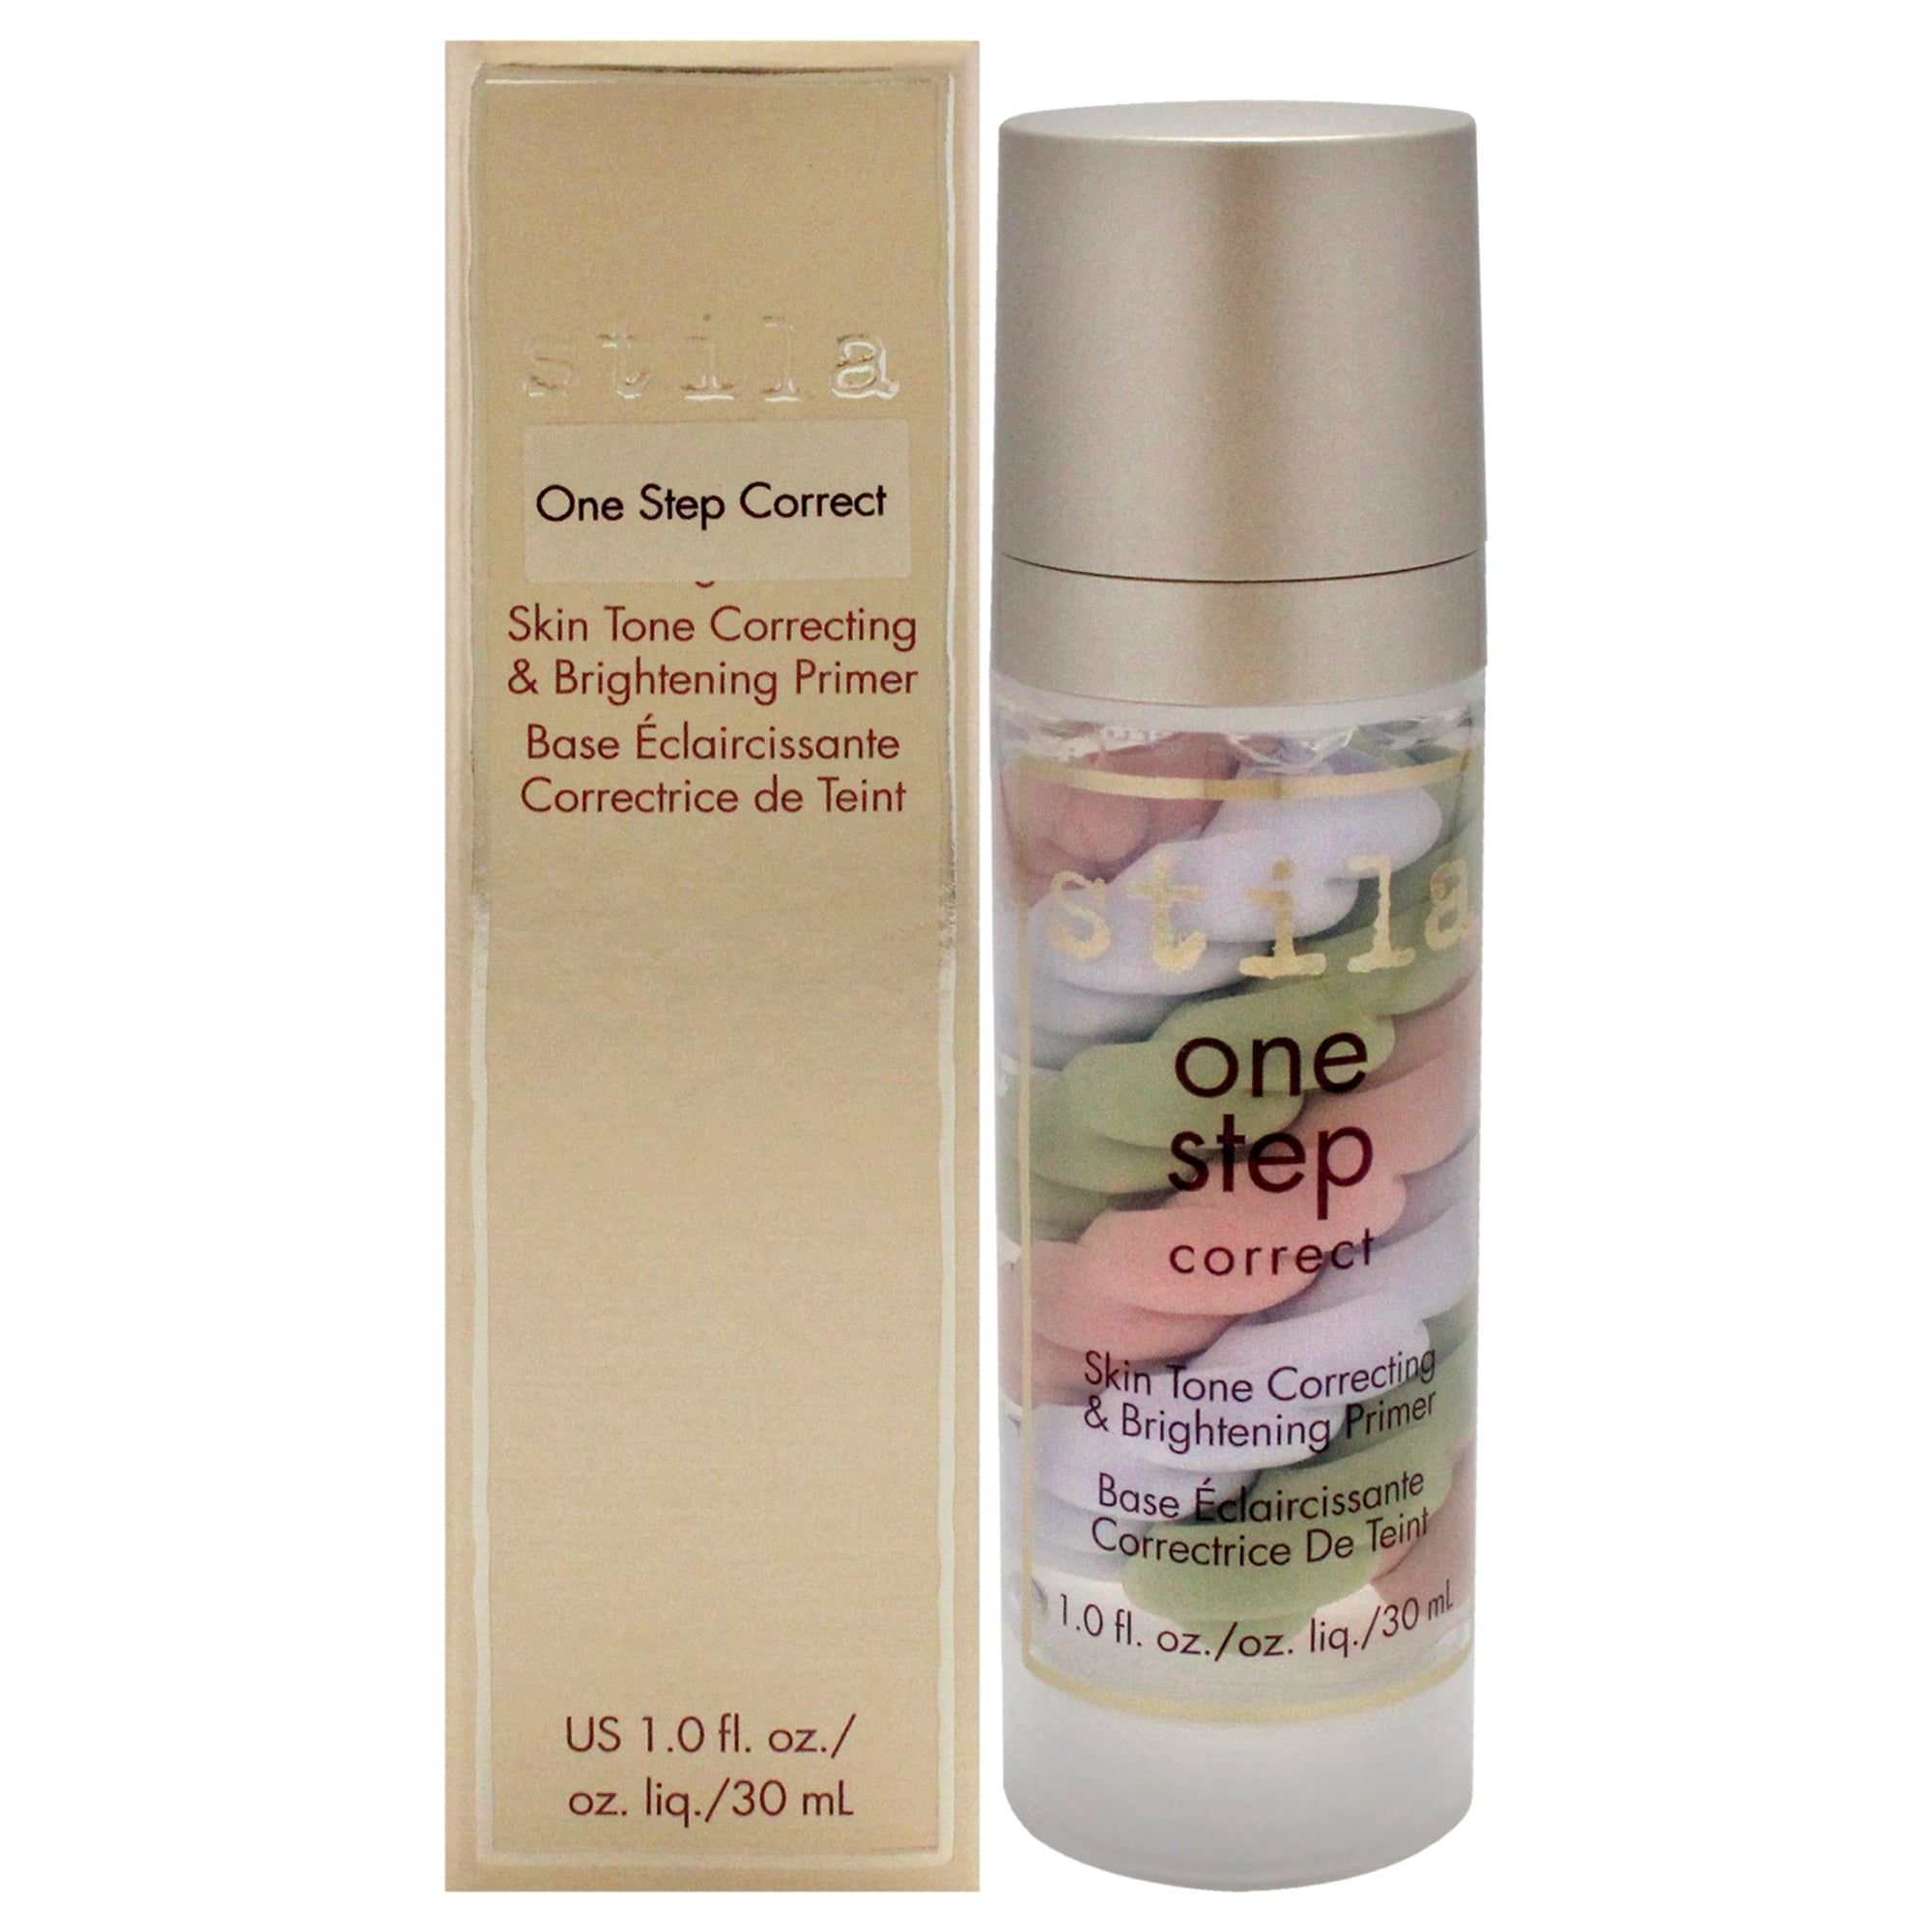 One Step Correct by Stila for Women 1 oz Concealer